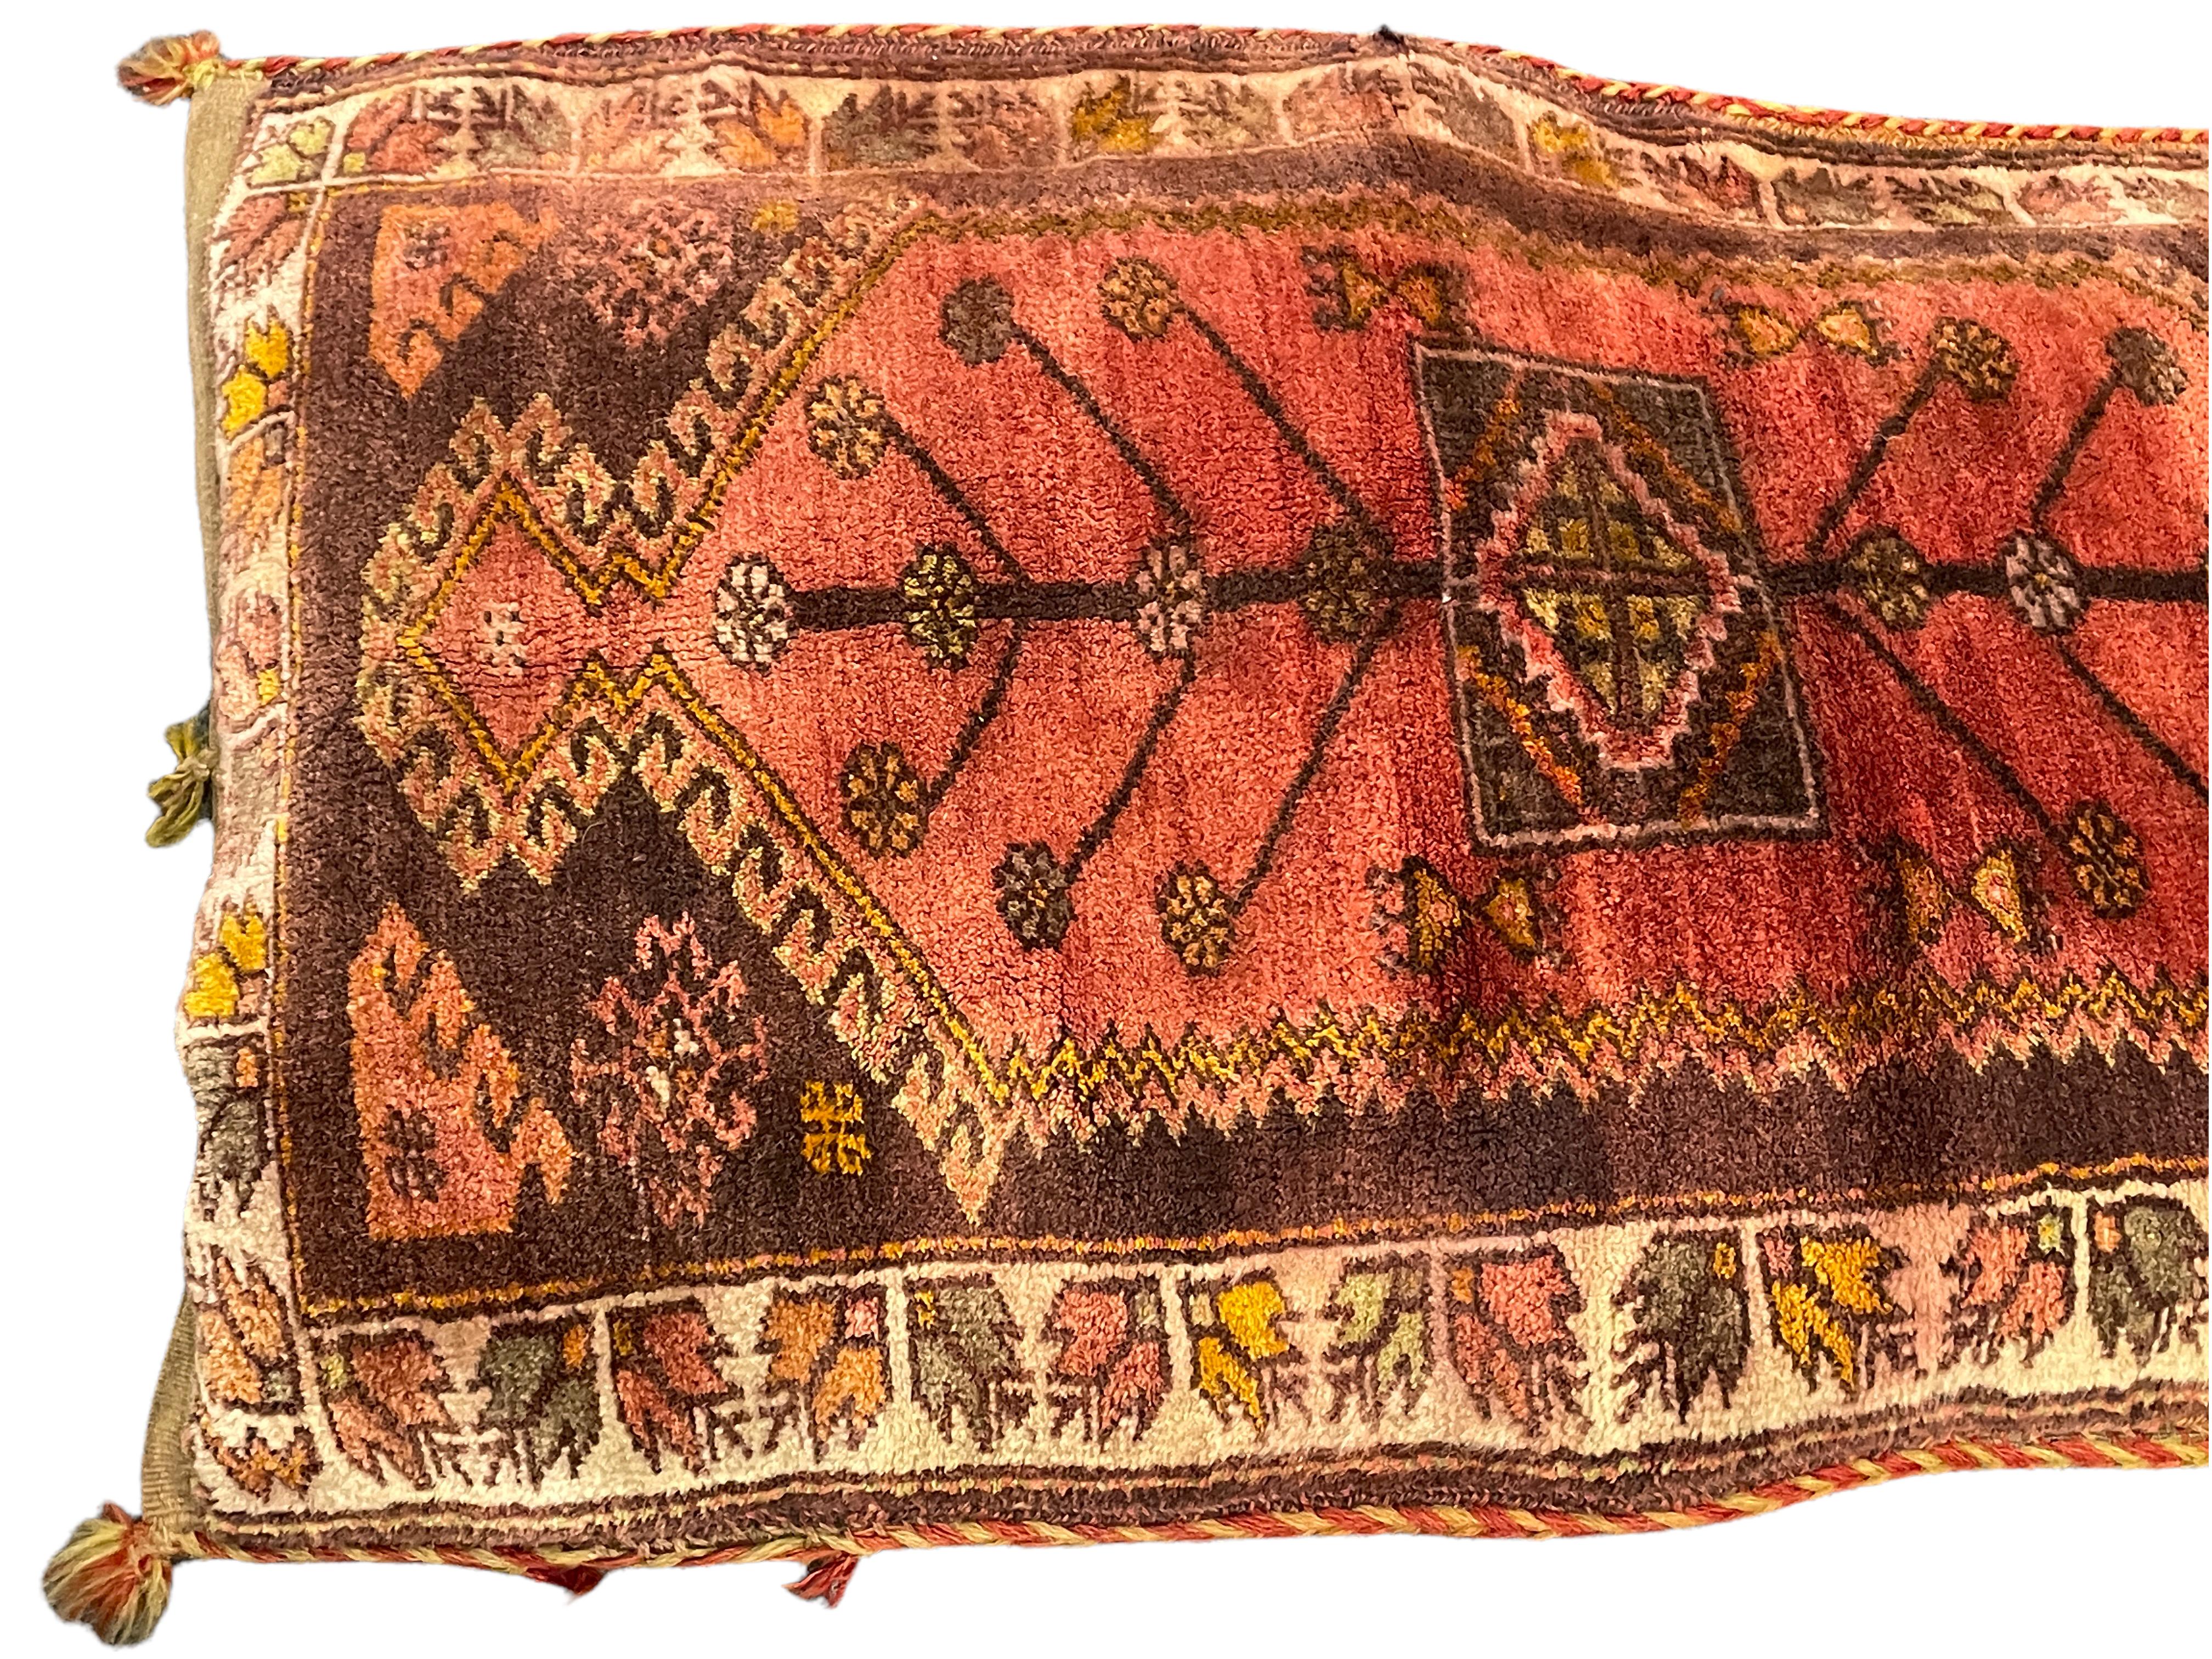 Stunning Large Gypsy Turkish Oriental Salt Bag or Rug Embroidery Pillow Case 3